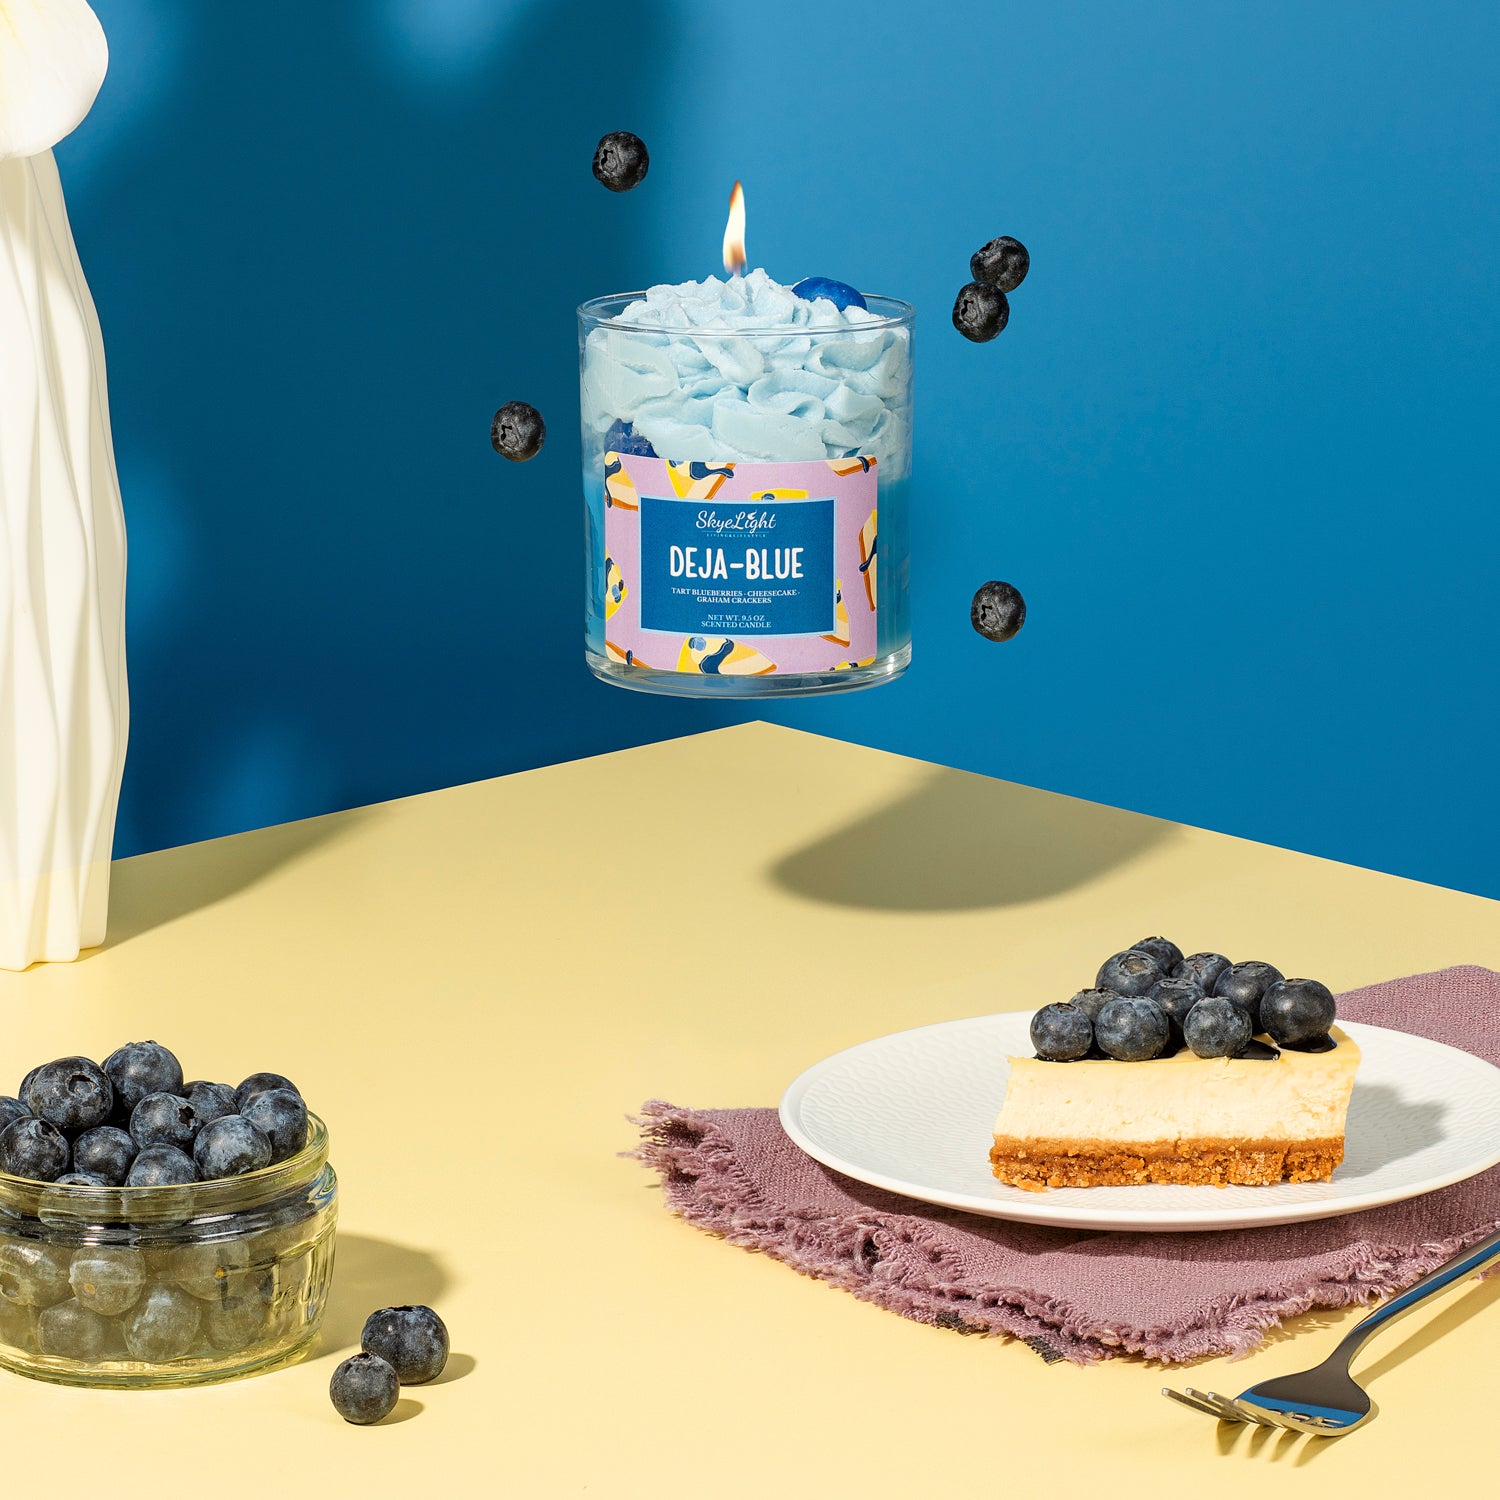 Blueberry Candle